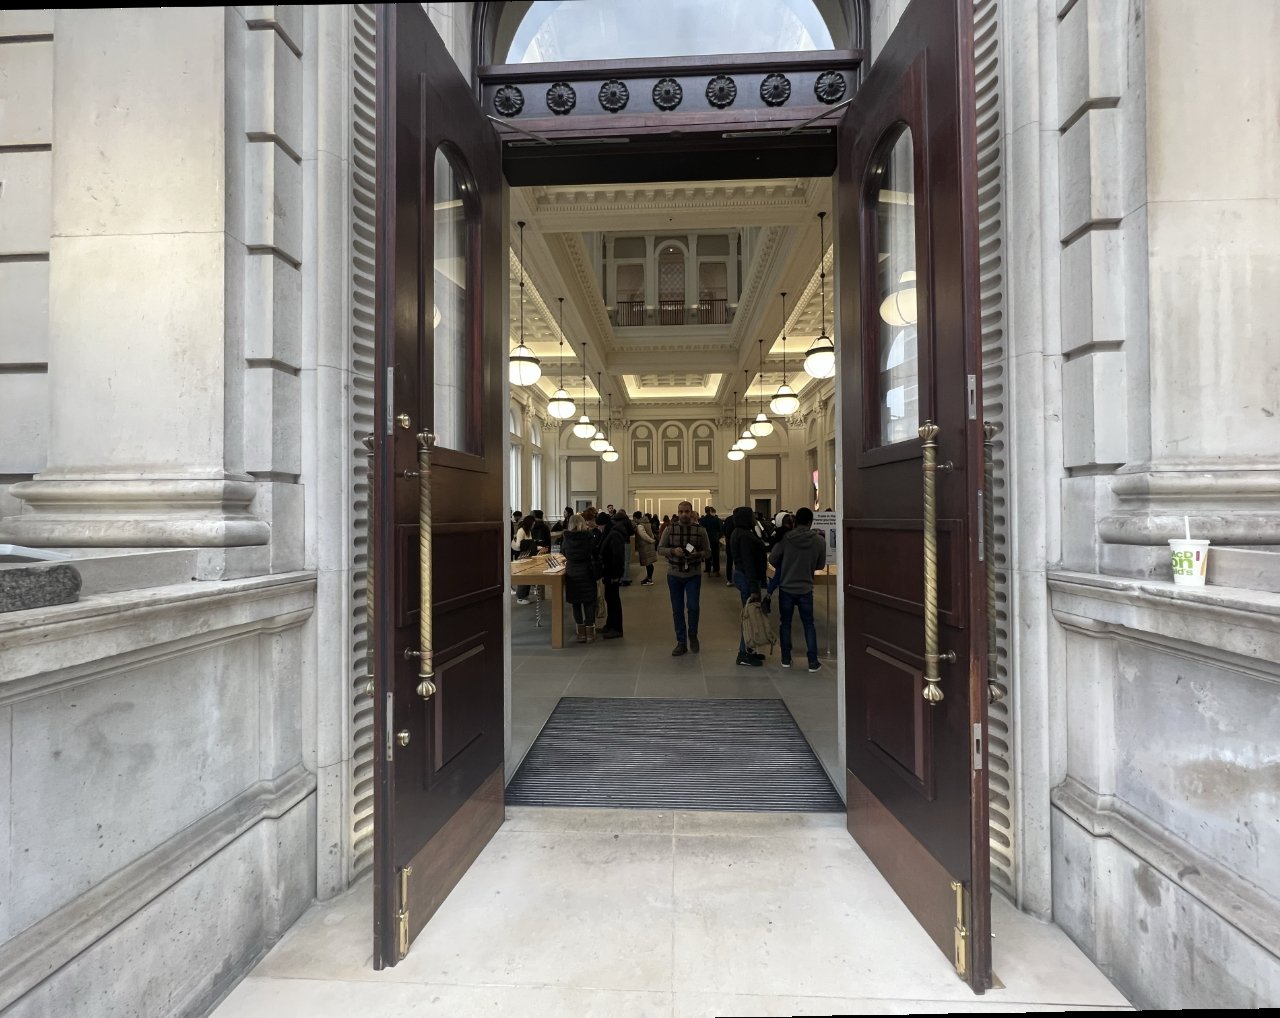 Walk through the 19th century bank doors at the Apple Store